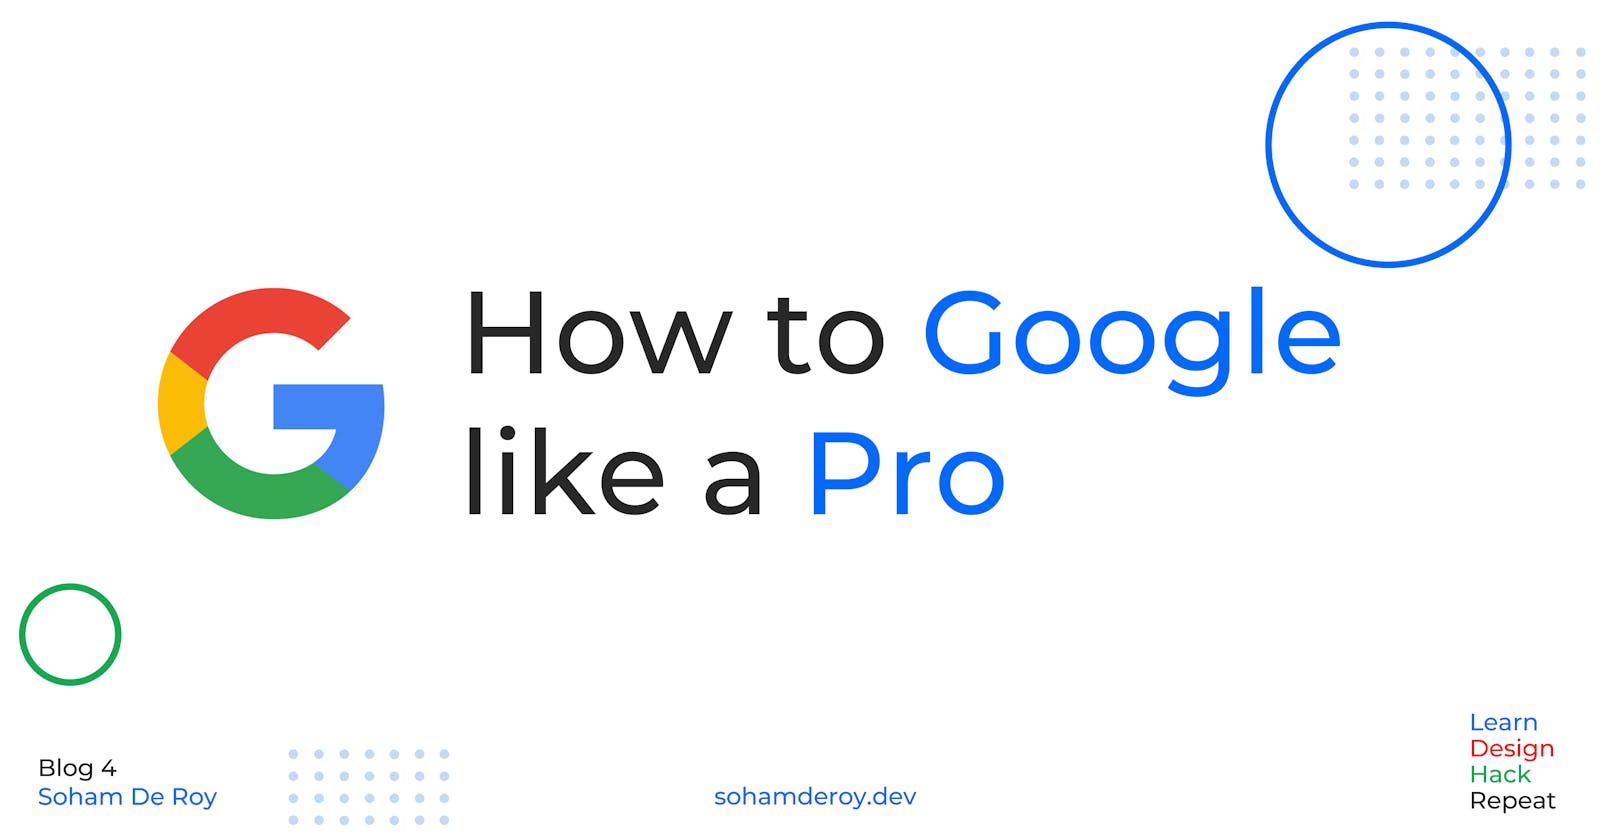 How to Google like a Pro 😎. #10Tips